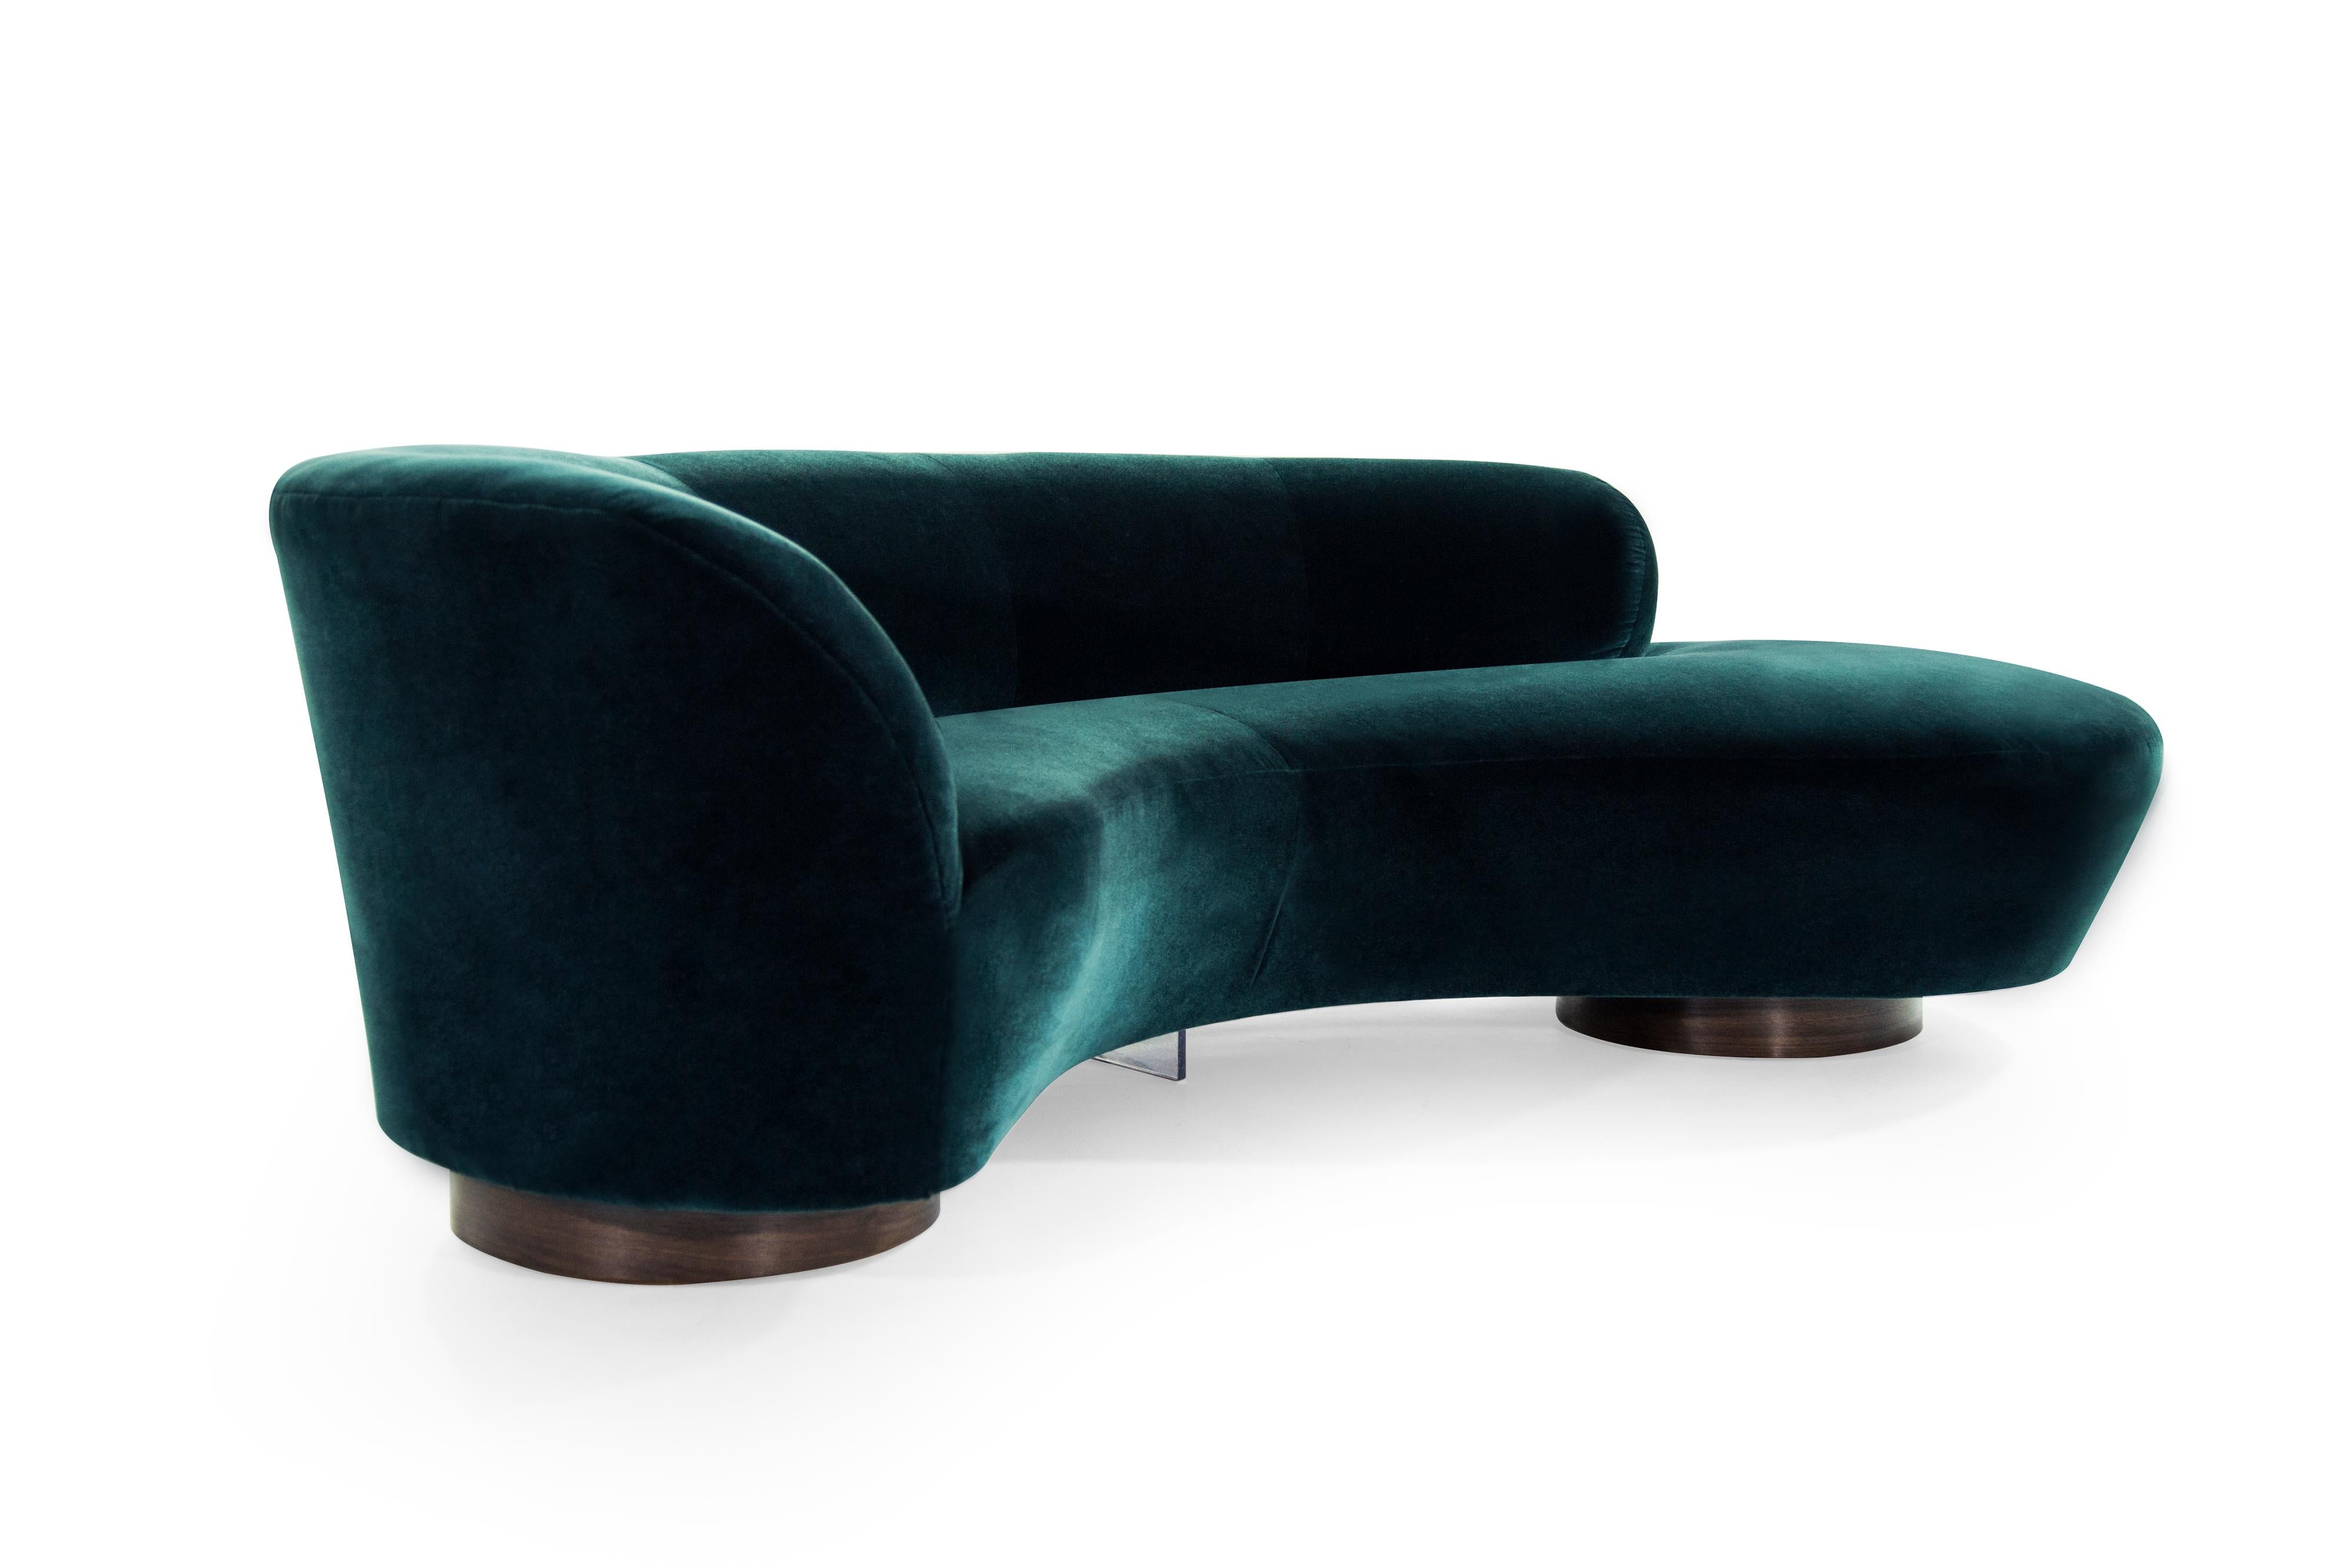 Rare serpentine sofa designed by the late Vladimir Kagan for Directional, circa 1970s. This rare example features fully restored walnut bases as well as Lucite support.

Newly upholstered in teal velvet by Holly Hunt.
 